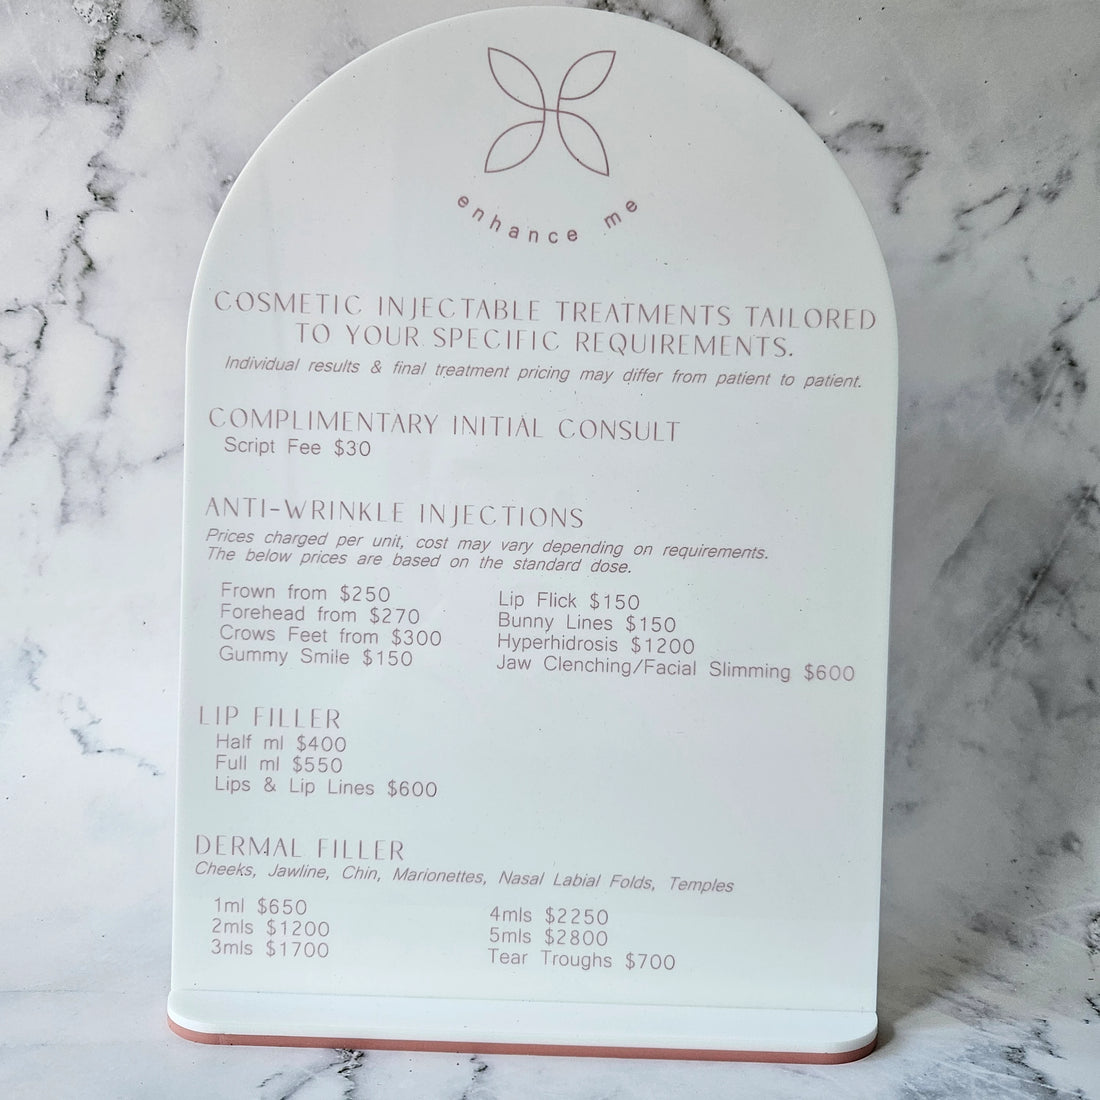 Arch Treatment Menu Price List Sign in White Acrylic with Pink Writing